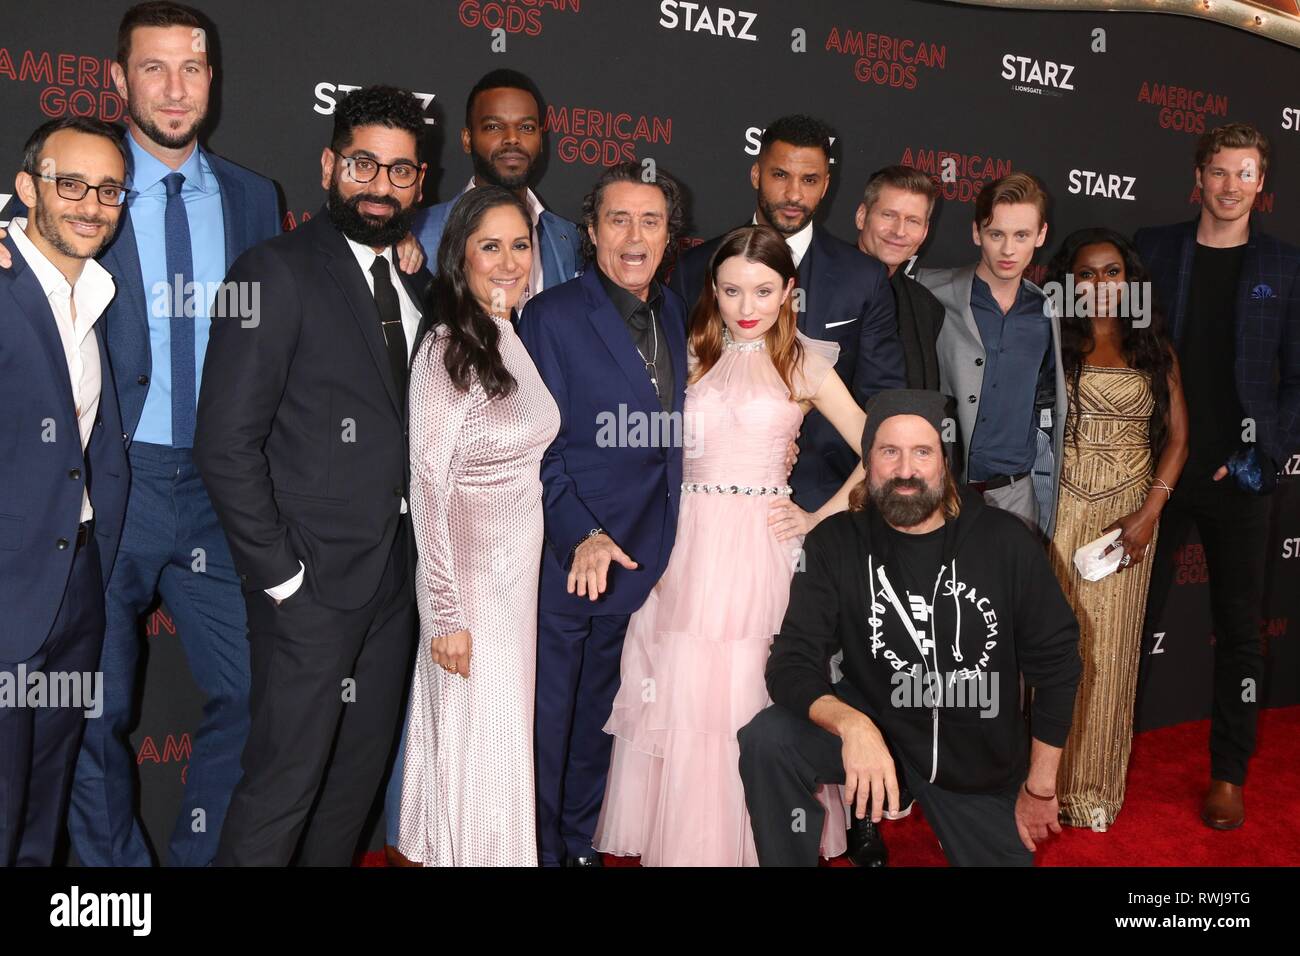 American gods cast hi-res stock photography and images - Alamy